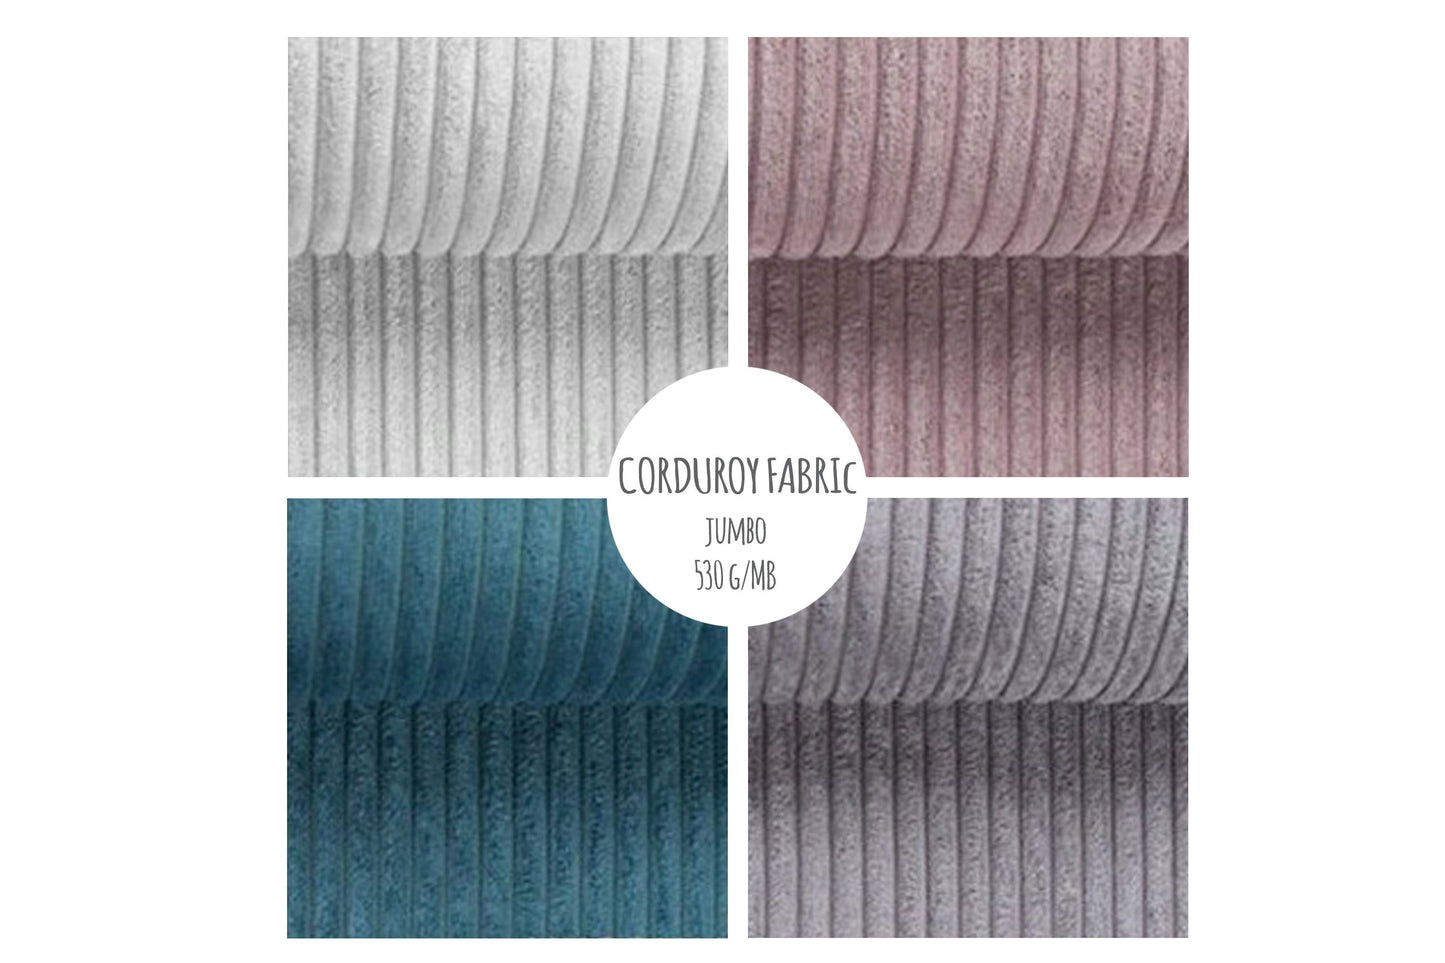 CORDUROY FABRIC, upholstery strip thic furniture fabric, pleasant to touch,  durable material, diffrent colors, fabric by the meter / yard